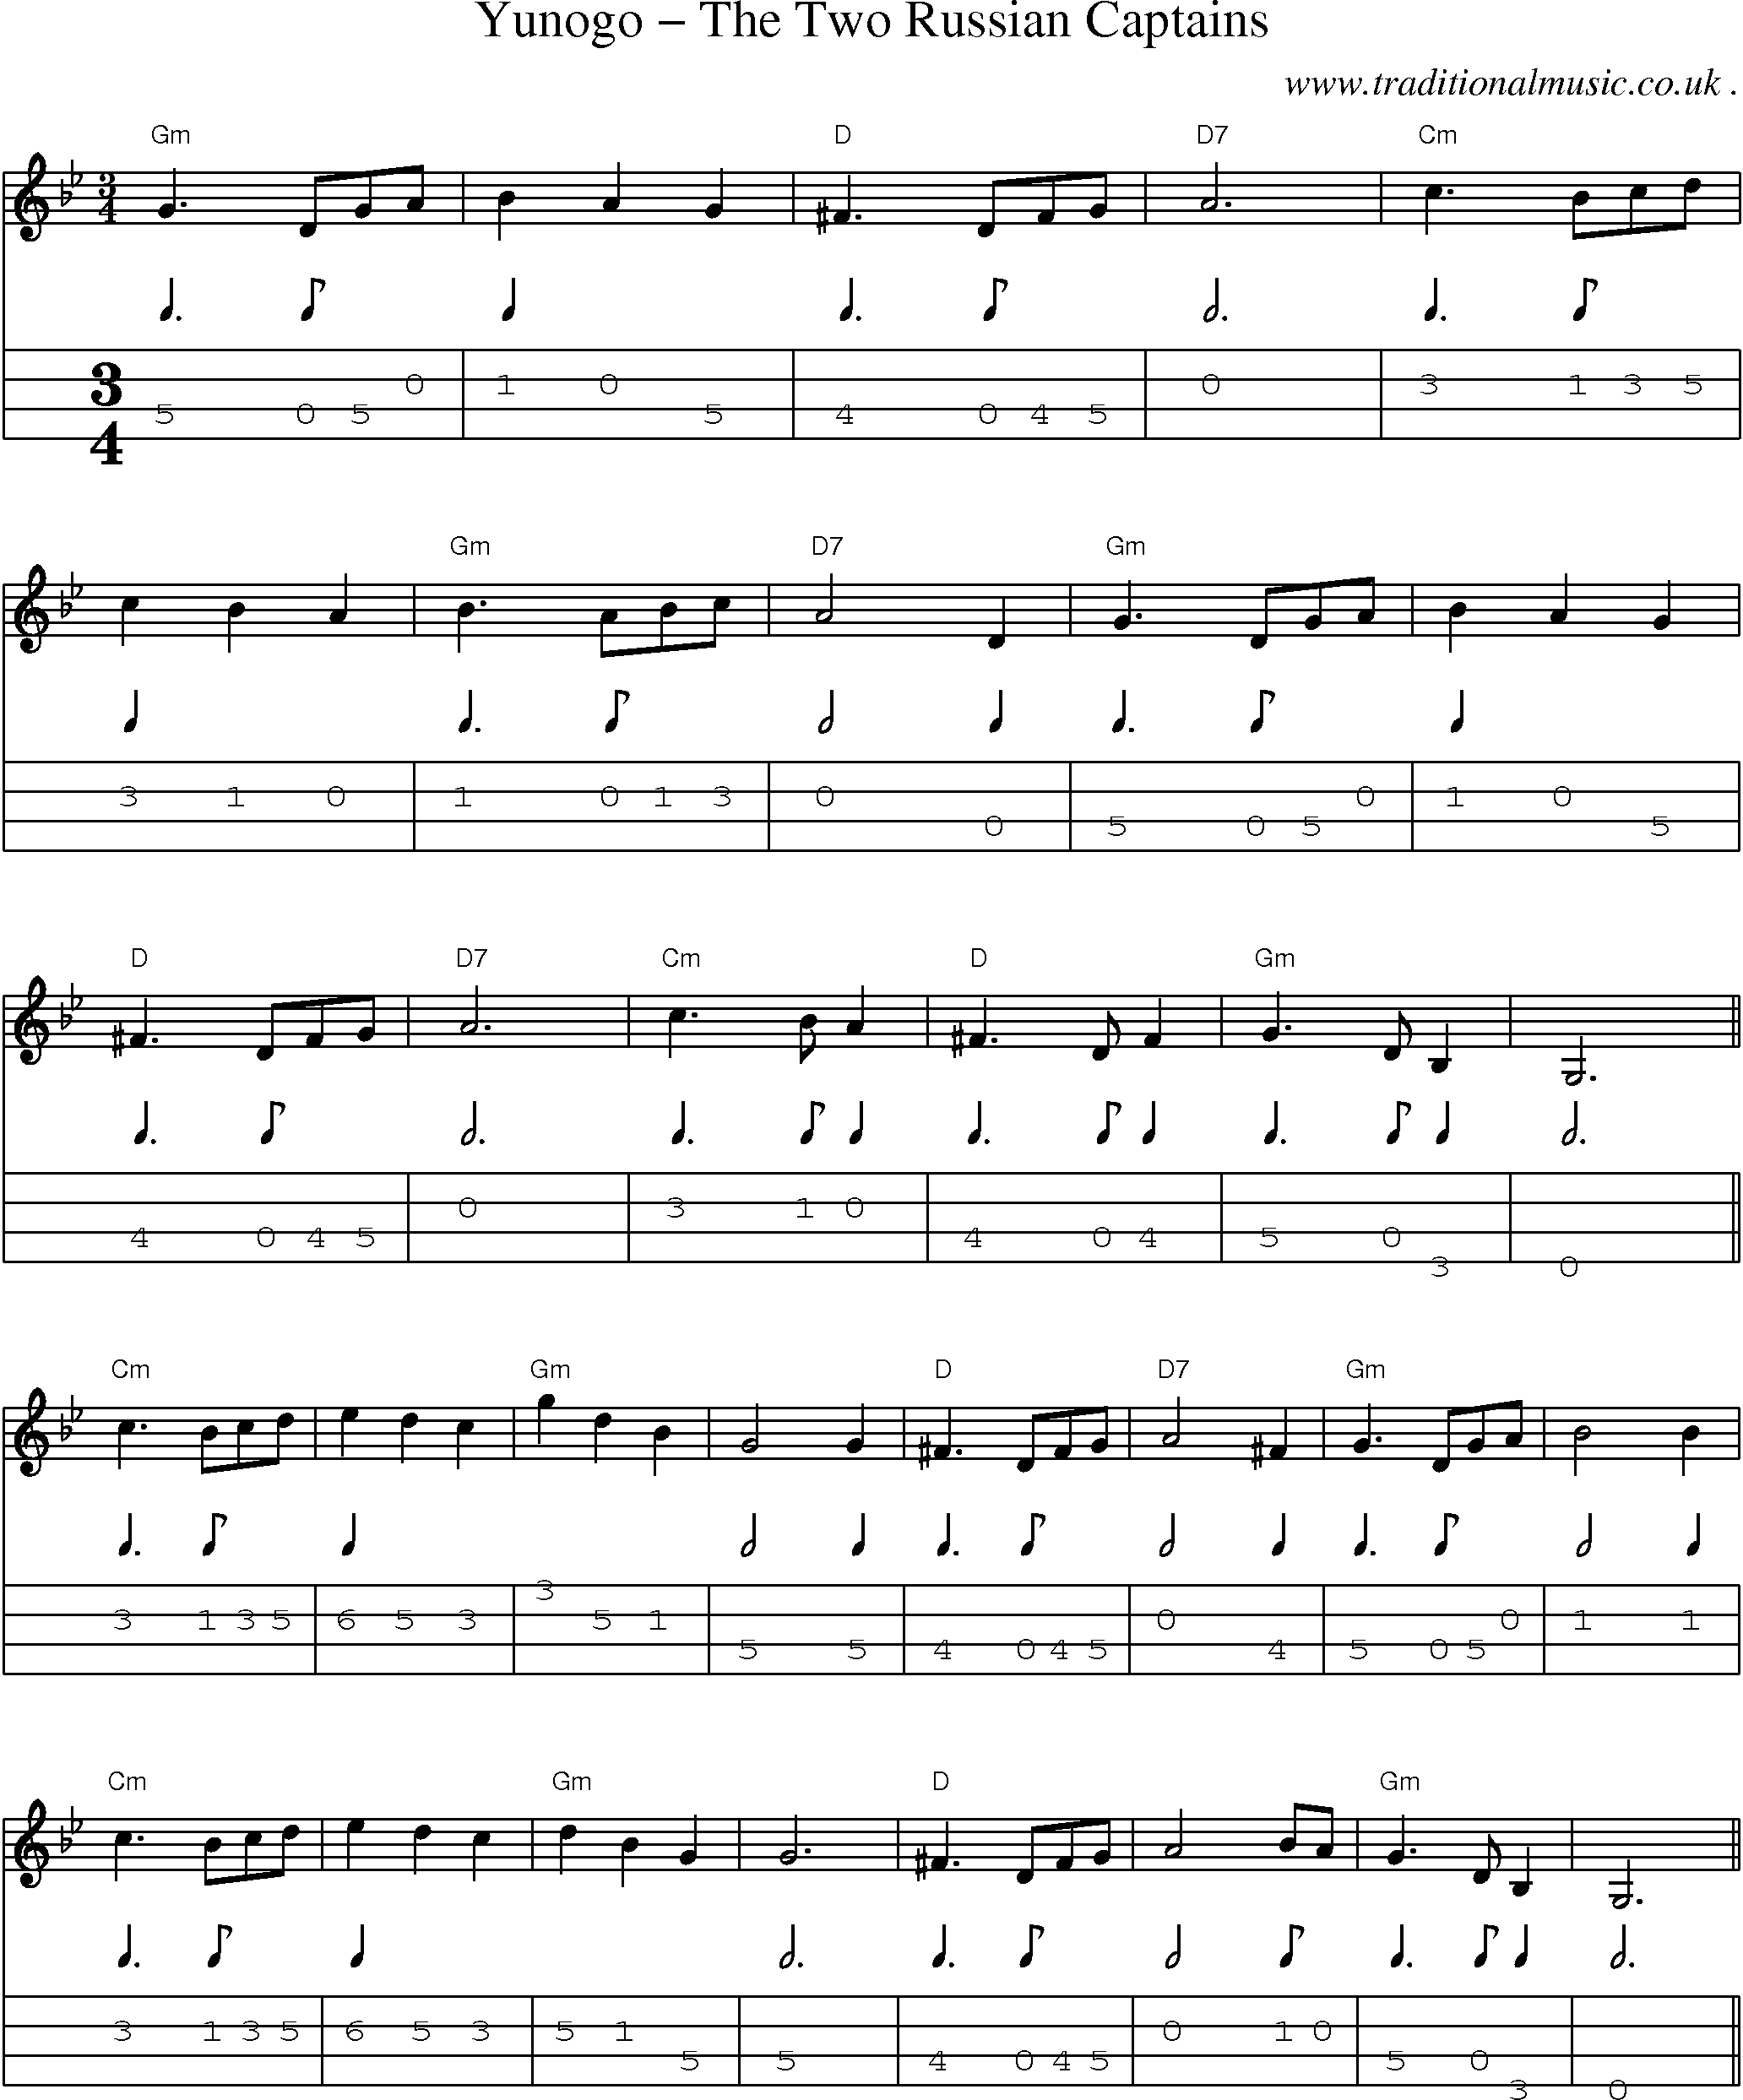 Music Score and Guitar Tabs for Yunogo The Two Russian Captains